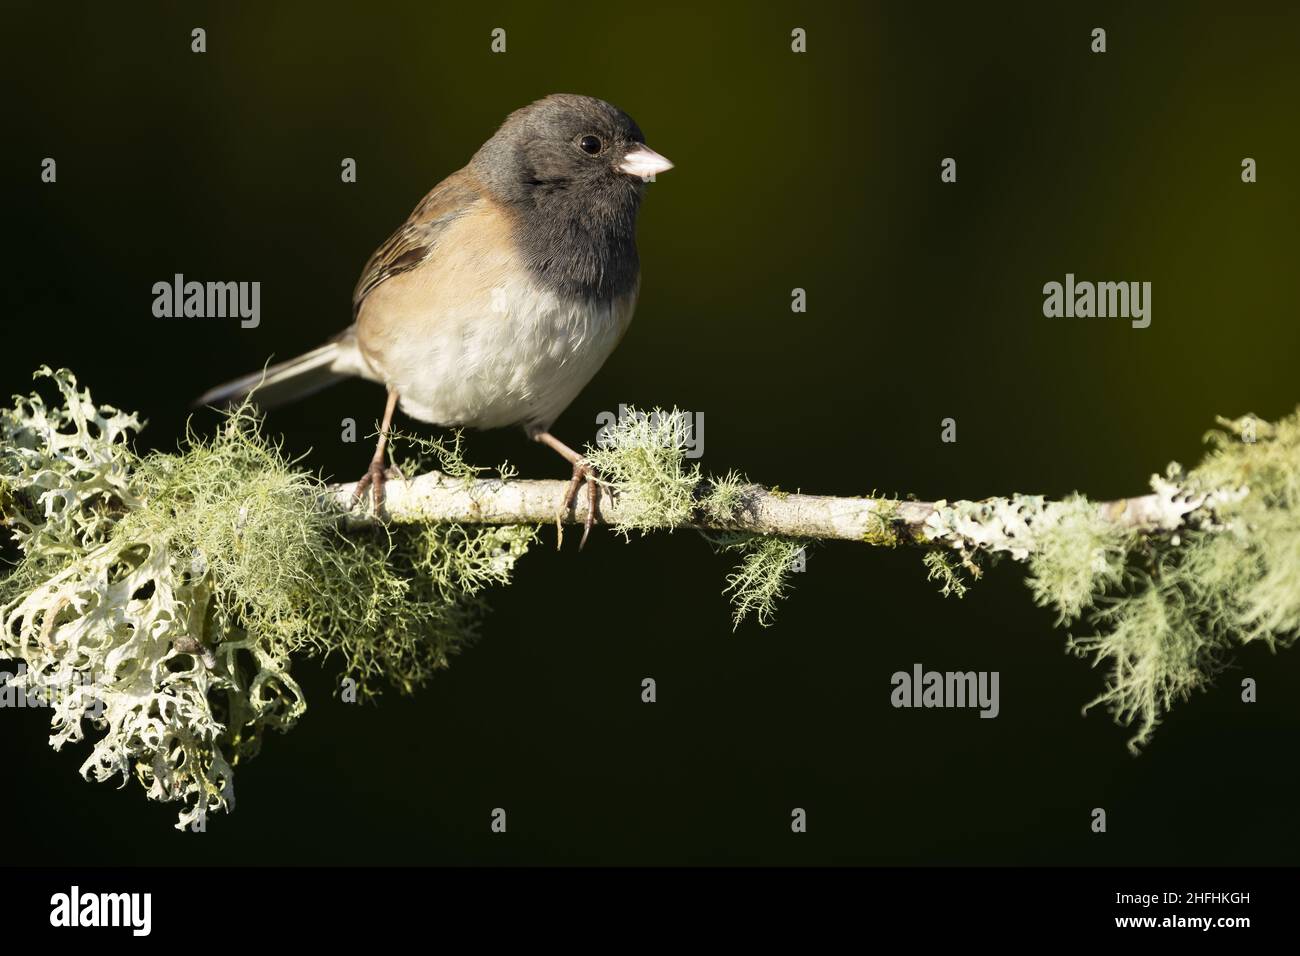 Female dark-eyed junco perched on lichen covered branch, Snohomish, Washington, USA Stock Photo